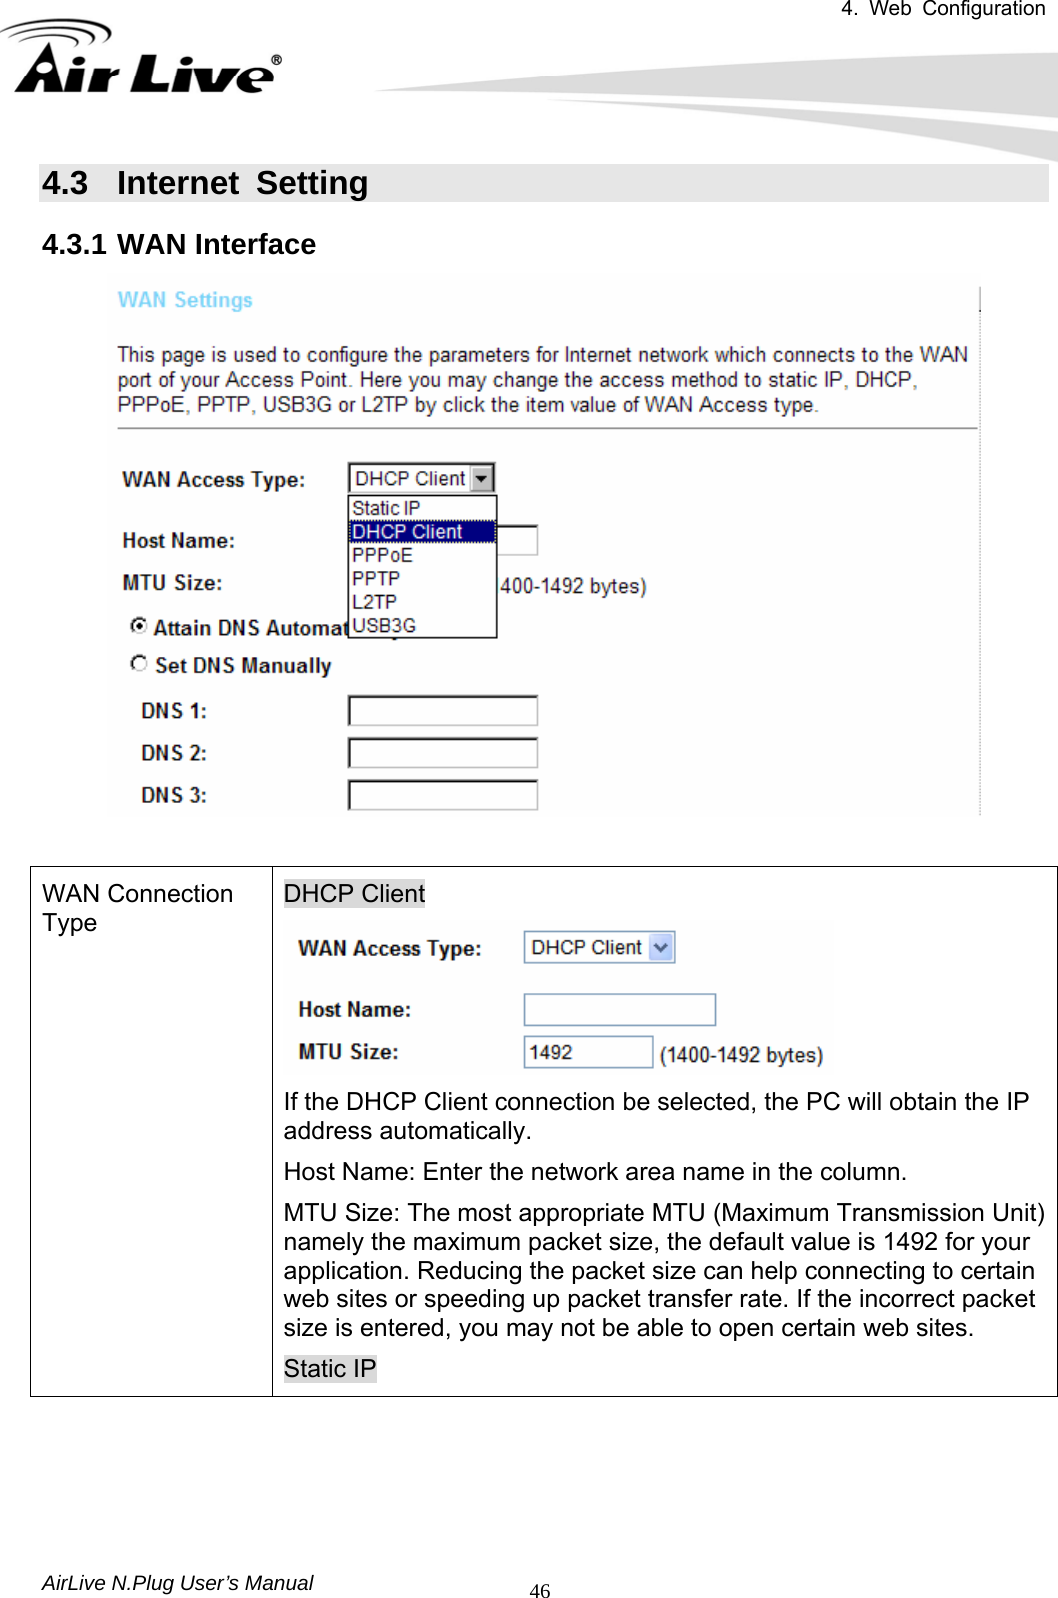 4. Web Configuration       AirLive N.Plug User’s Manual  464.3 Internet Setting 4.3.1 WAN Interface   WAN Connection Type DHCP Client  If the DHCP Client connection be selected, the PC will obtain the IP address automatically.   Host Name: Enter the network area name in the column.   MTU Size: The most appropriate MTU (Maximum Transmission Unit) namely the maximum packet size, the default value is 1492 for your application. Reducing the packet size can help connecting to certain web sites or speeding up packet transfer rate. If the incorrect packet size is entered, you may not be able to open certain web sites. Static IP 